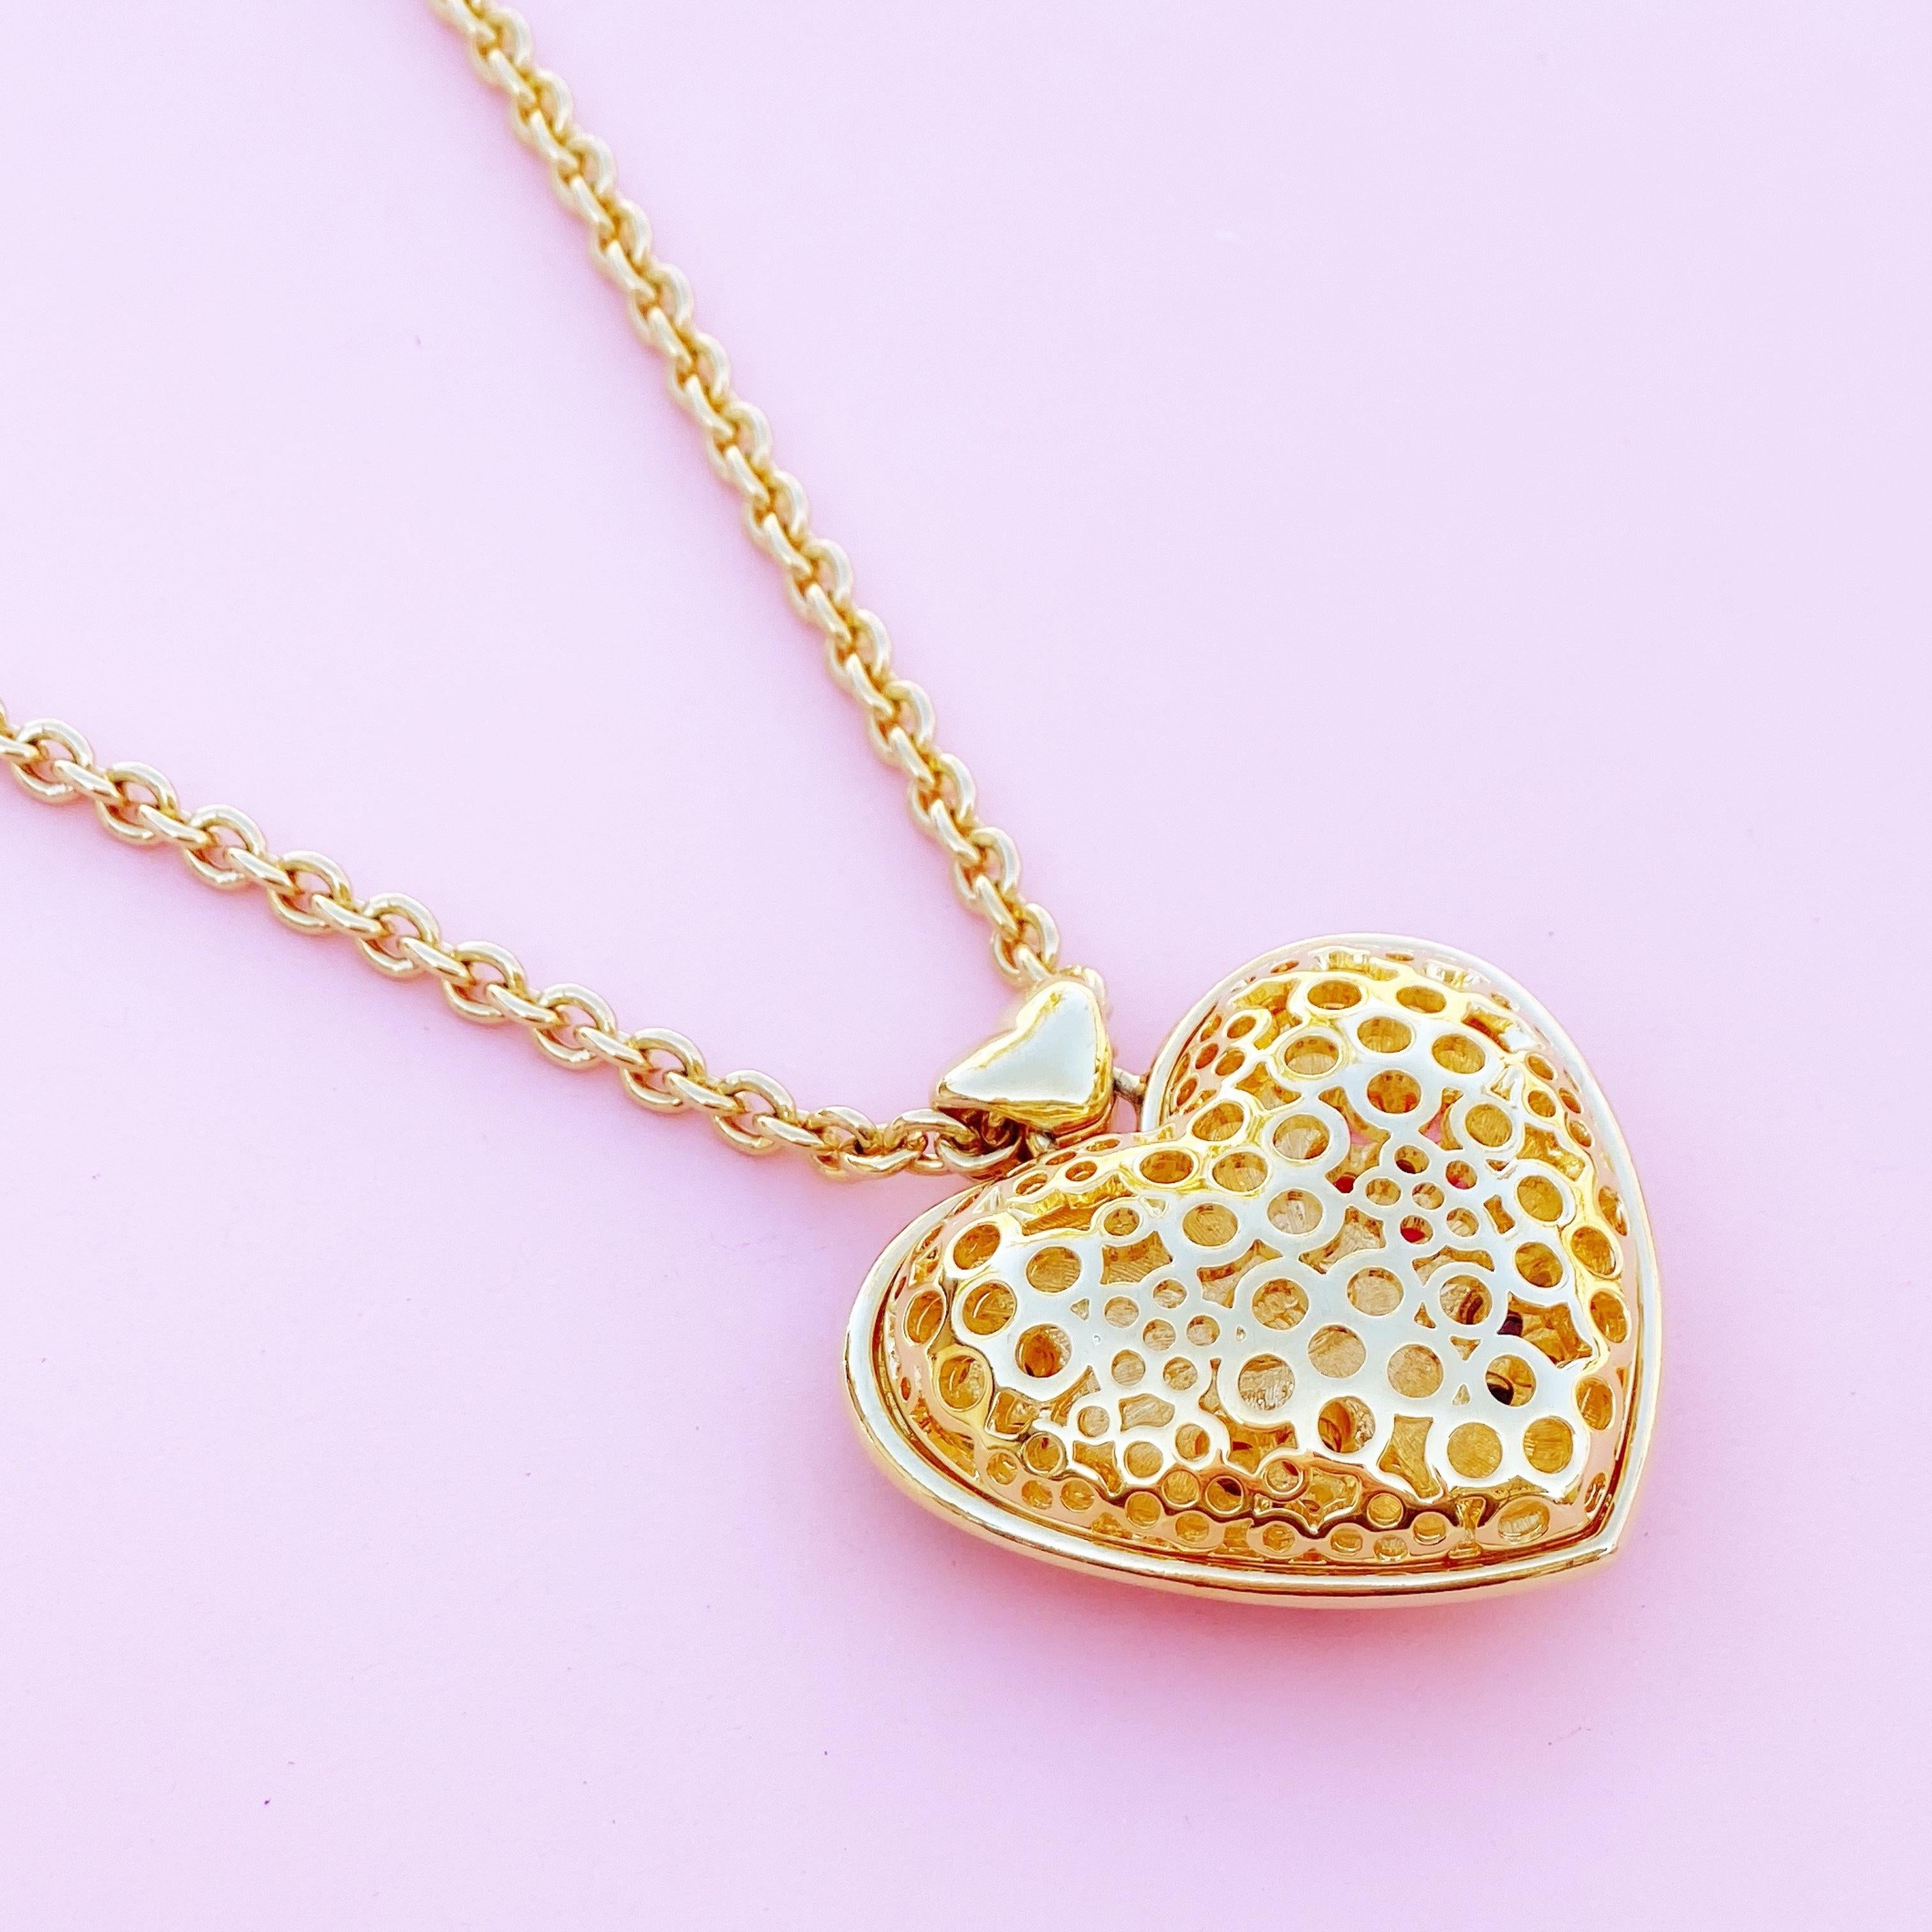 Modern Puffy Rhinestone Heart Pendant Necklace with Floral Motif By Nolan Miller, 1980s